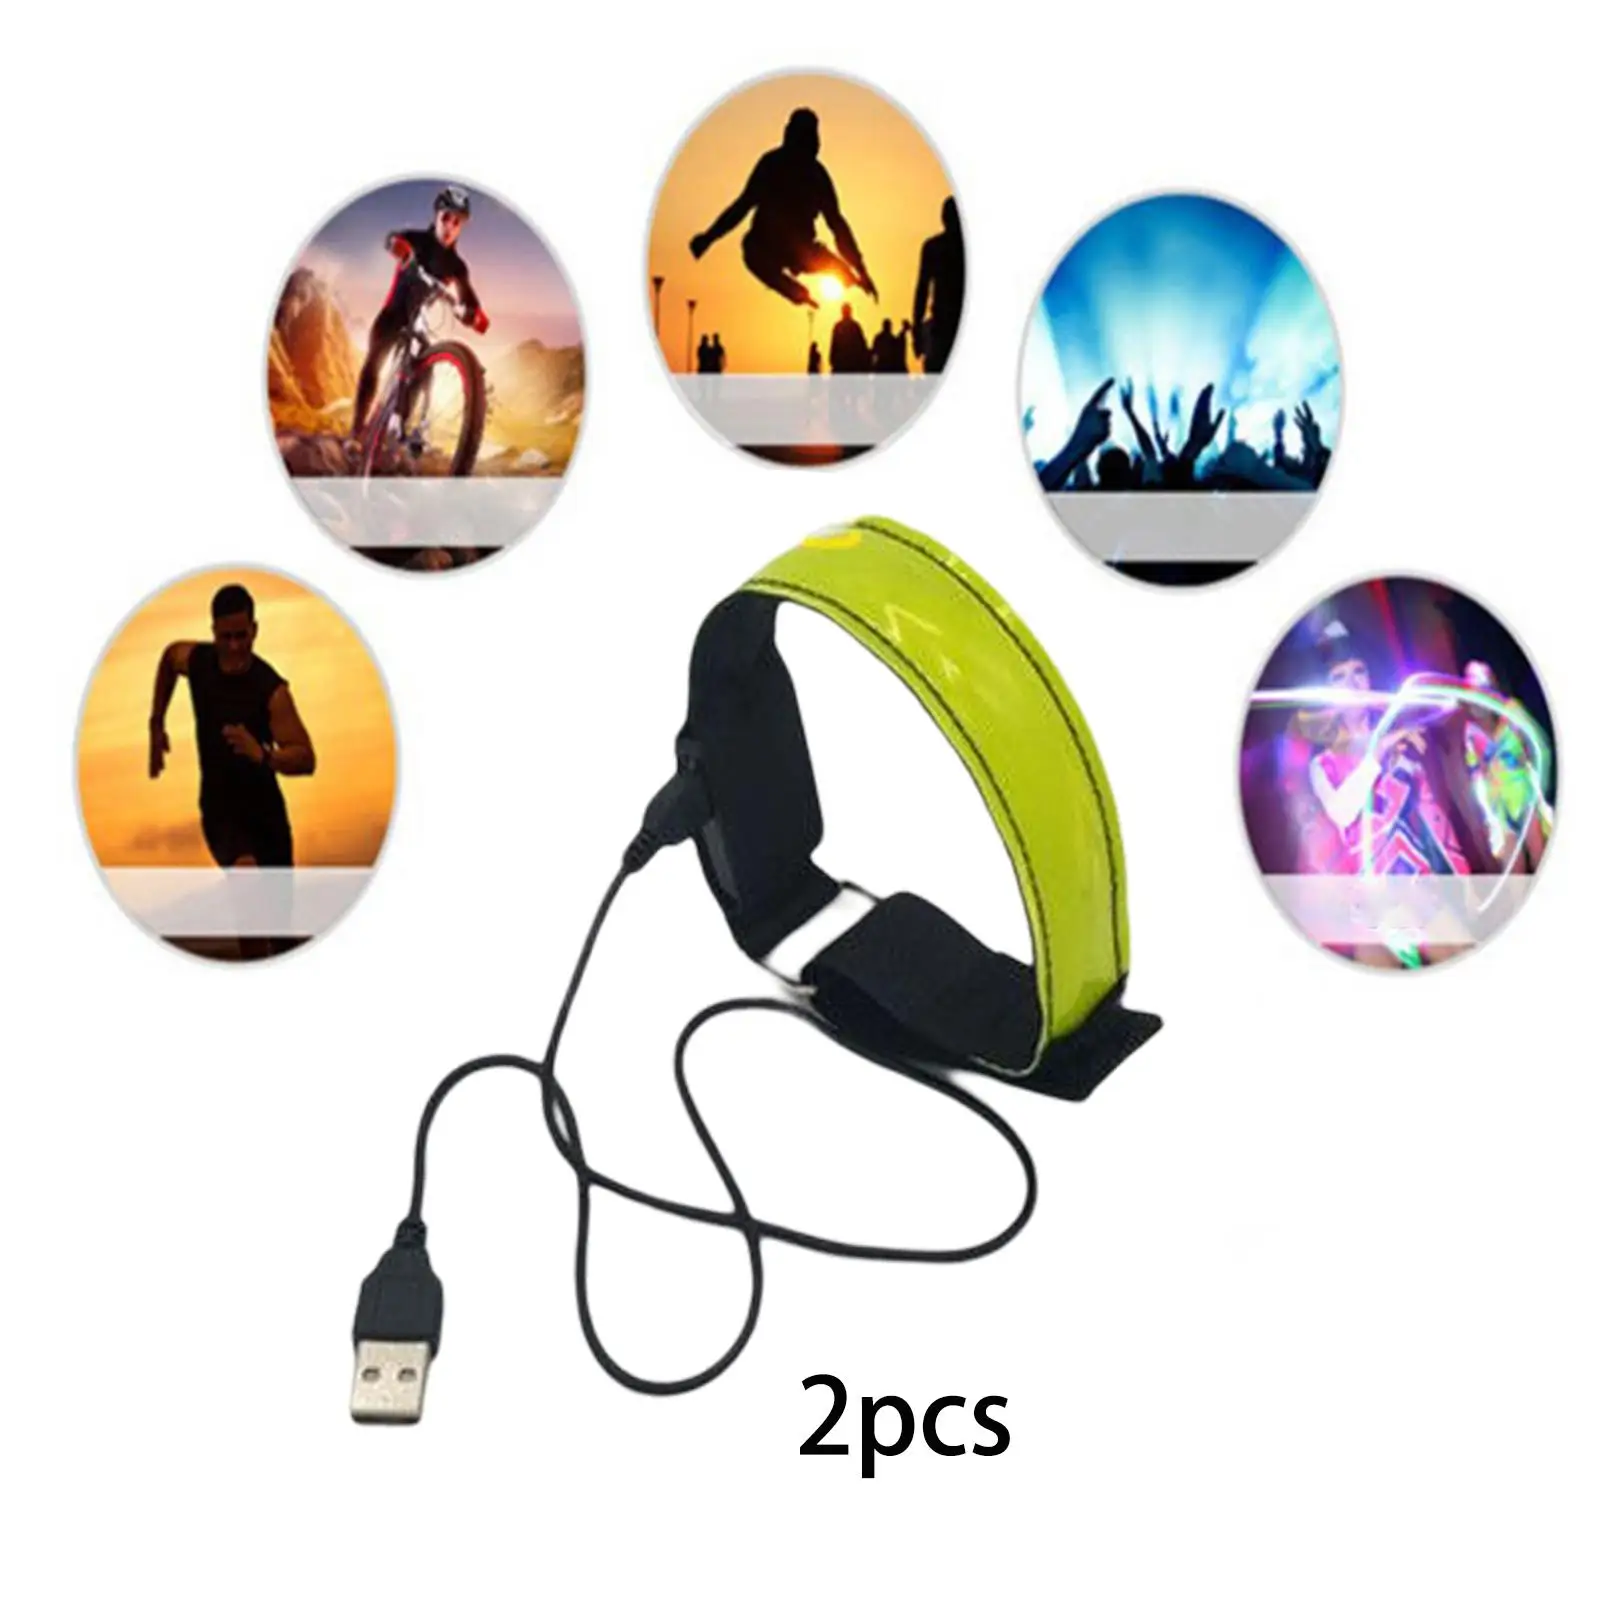 2Pcs USB Rechargeable LED Armbands High Visibility Arm Bands Runners Accessories